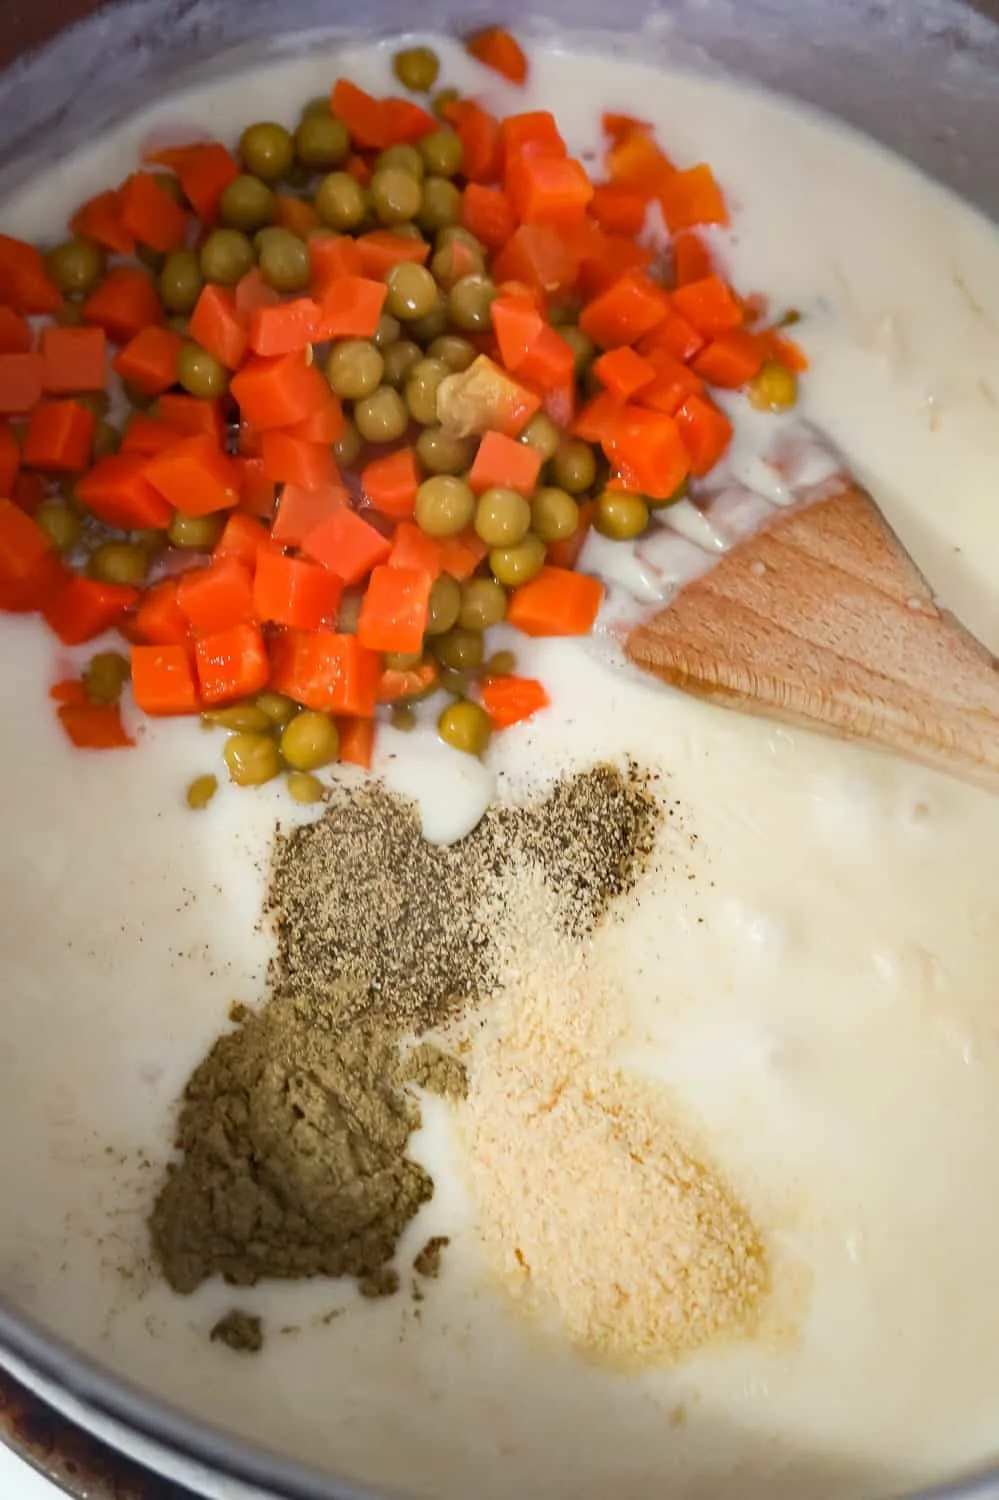 canned peas and carrots, salt, pepper and onion powder being added to creamy turkey soup